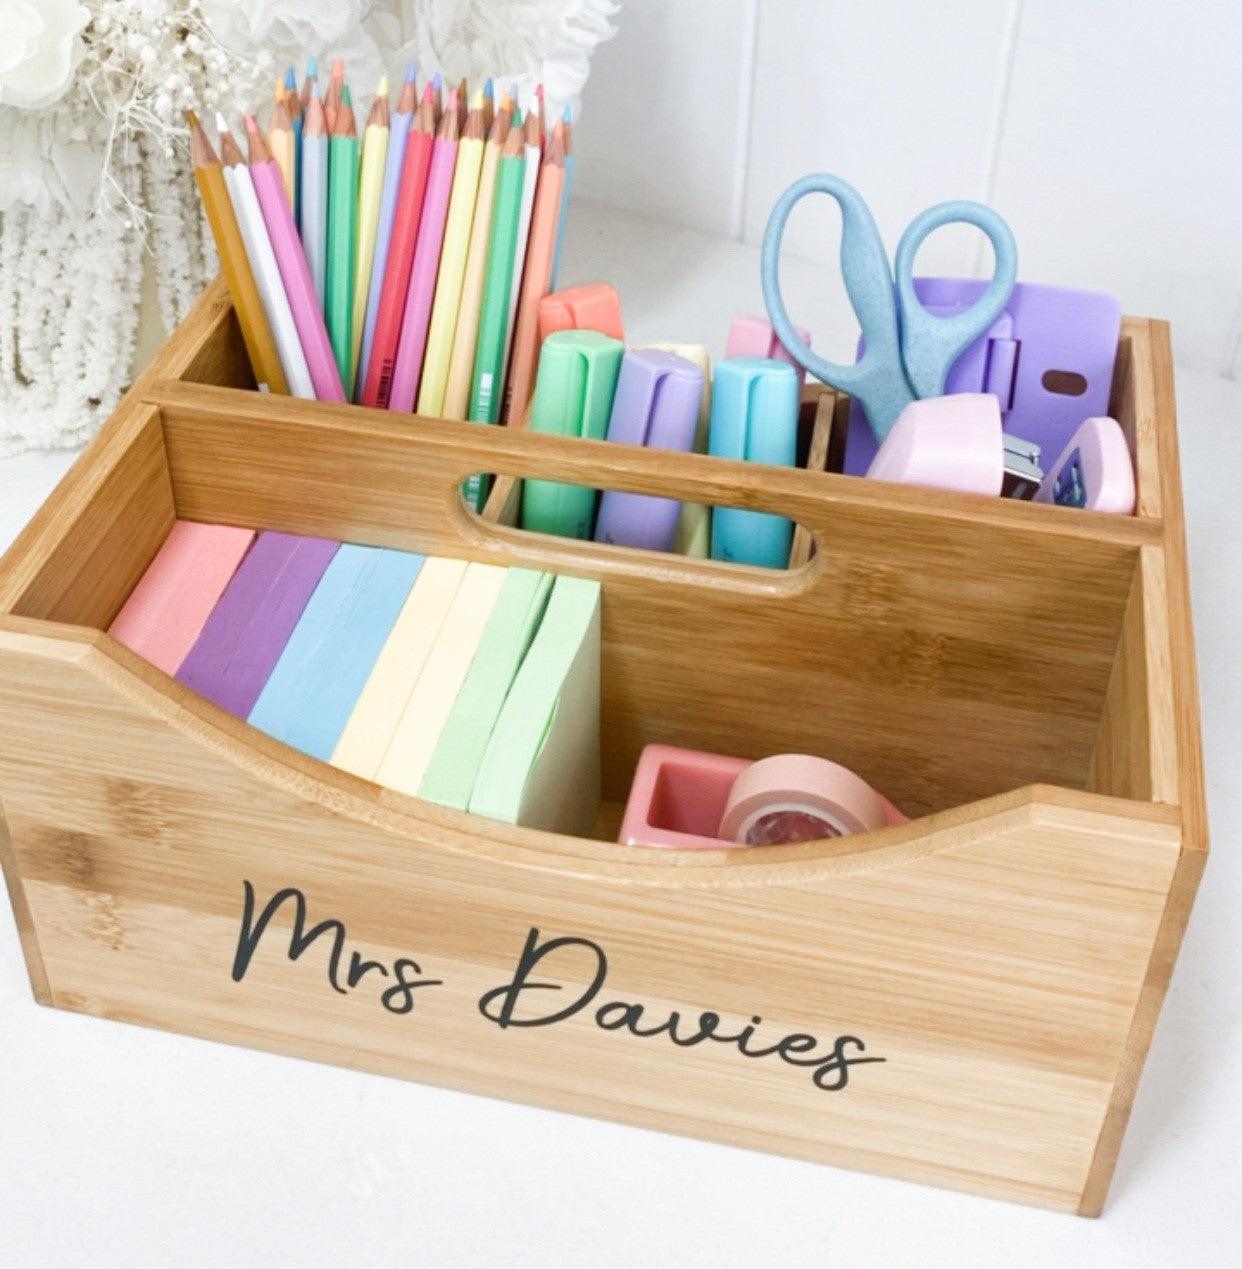 Bamboo Caddy - Little Label Co - Storage & Organization - 20%, Bamboo Storage Solutions, Bathroom & Cleaning, Bathroom Storage, Caddy, Catchoftheday, Kitchen Storage, Multi Use Storage, Office Organisation, warehouse